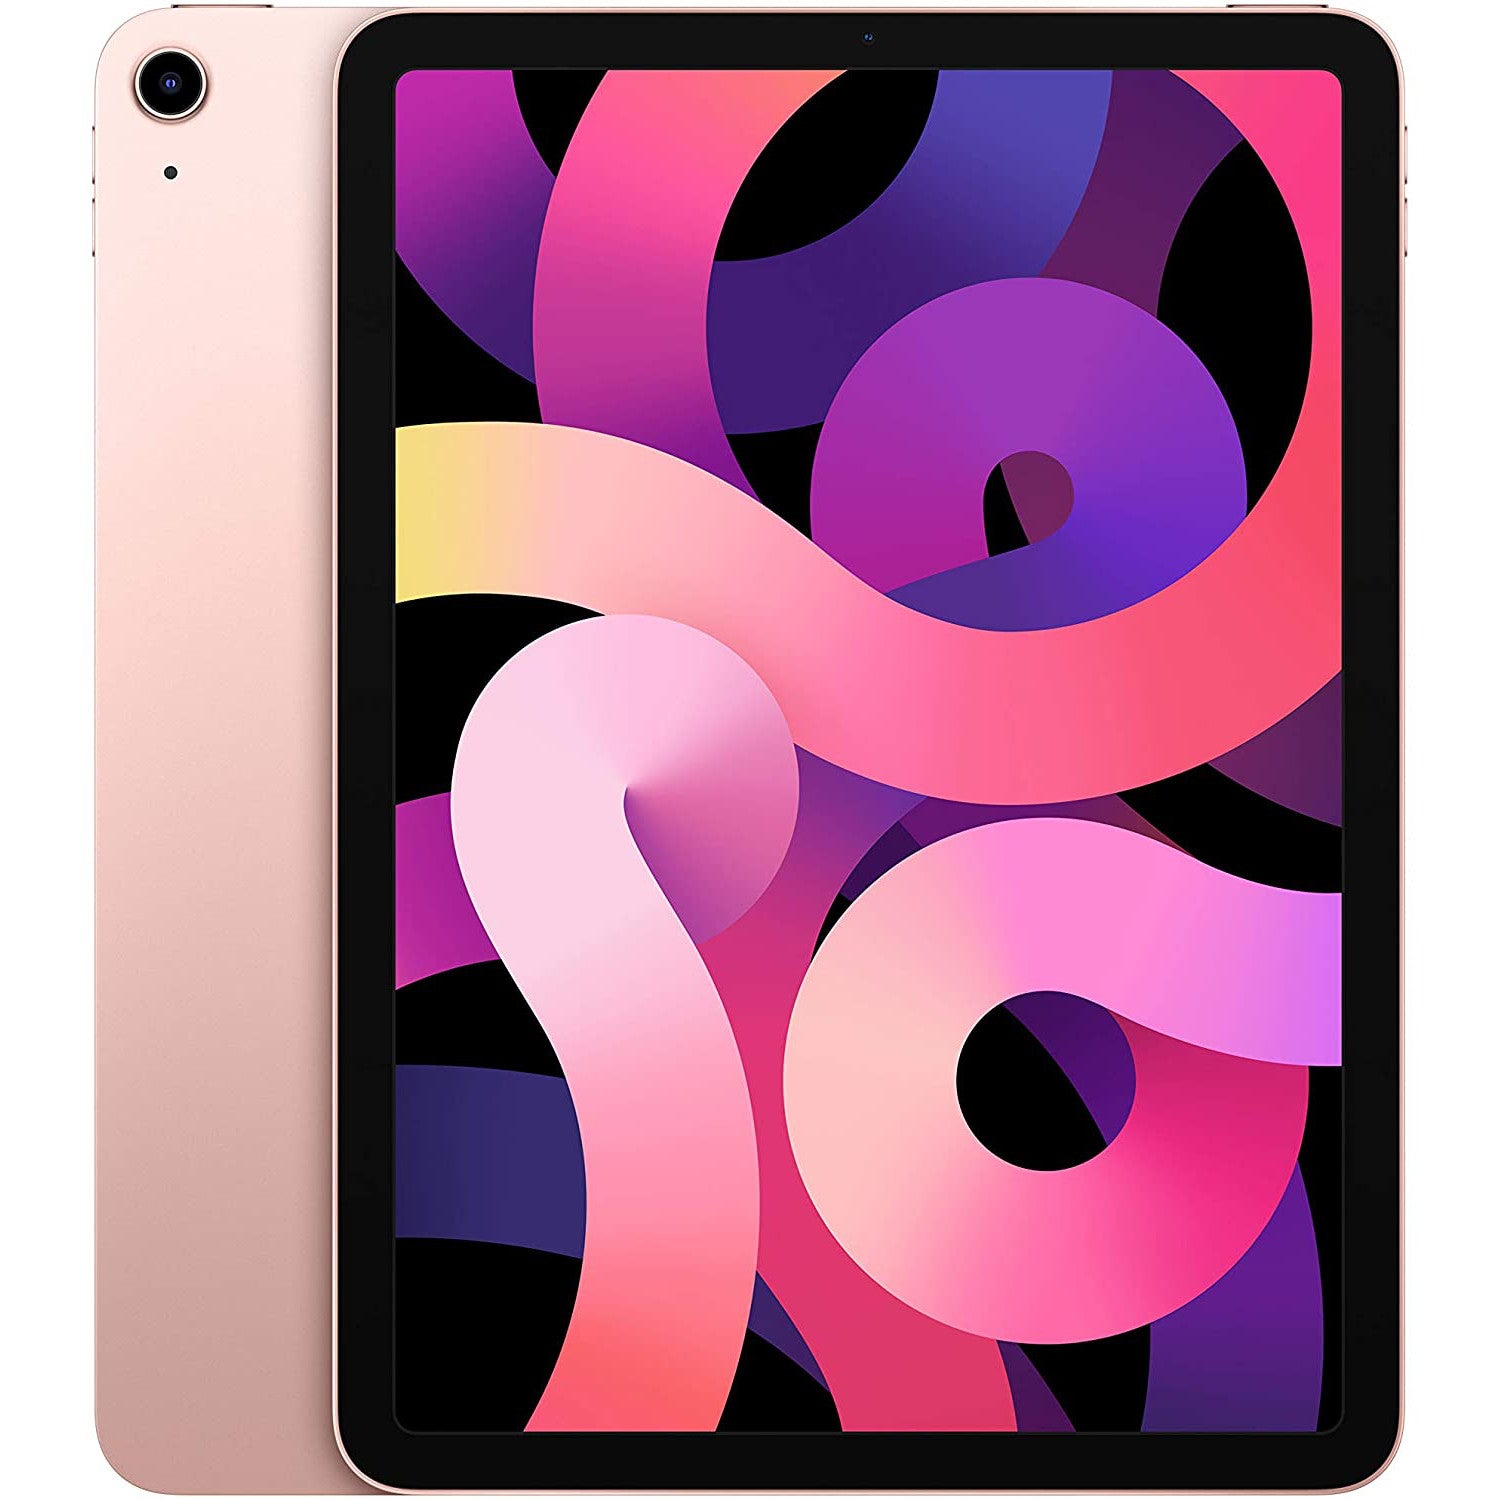 iPad Air 4 64GB WiFi & Cellular - Oro rosa - Impecable